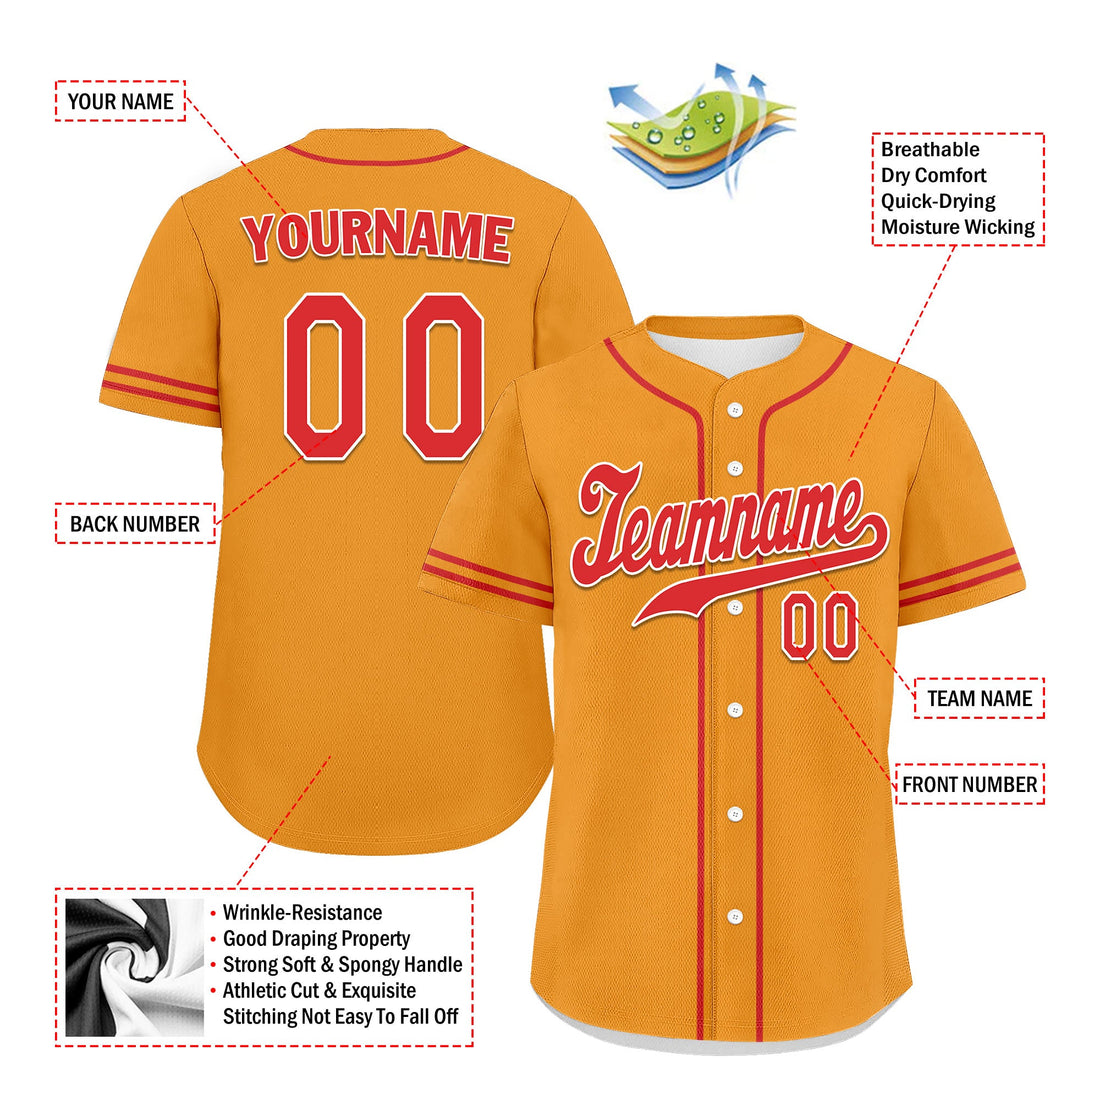 Custom Yellow Classic Style Red Personalized Authentic Baseball Jersey UN002-bd0b00d8-ad